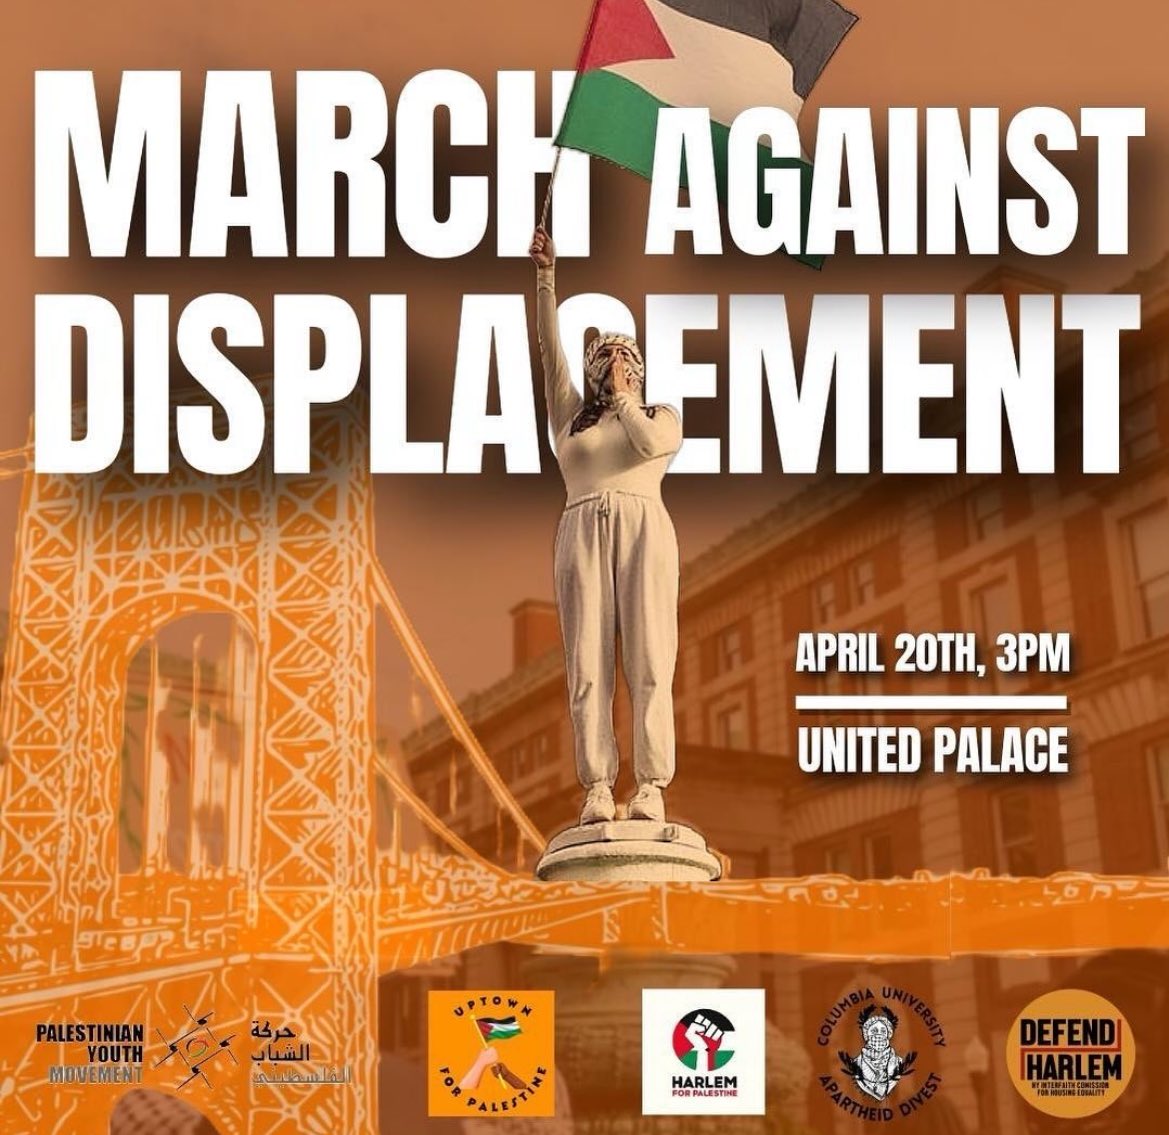 @AchmatX our march against Columbia’s displacement of communities in Harlem is happening this Friday, April 20th at 3 PM! We will be joined by Harlem For Palestine, Defend Harlem, and more!!